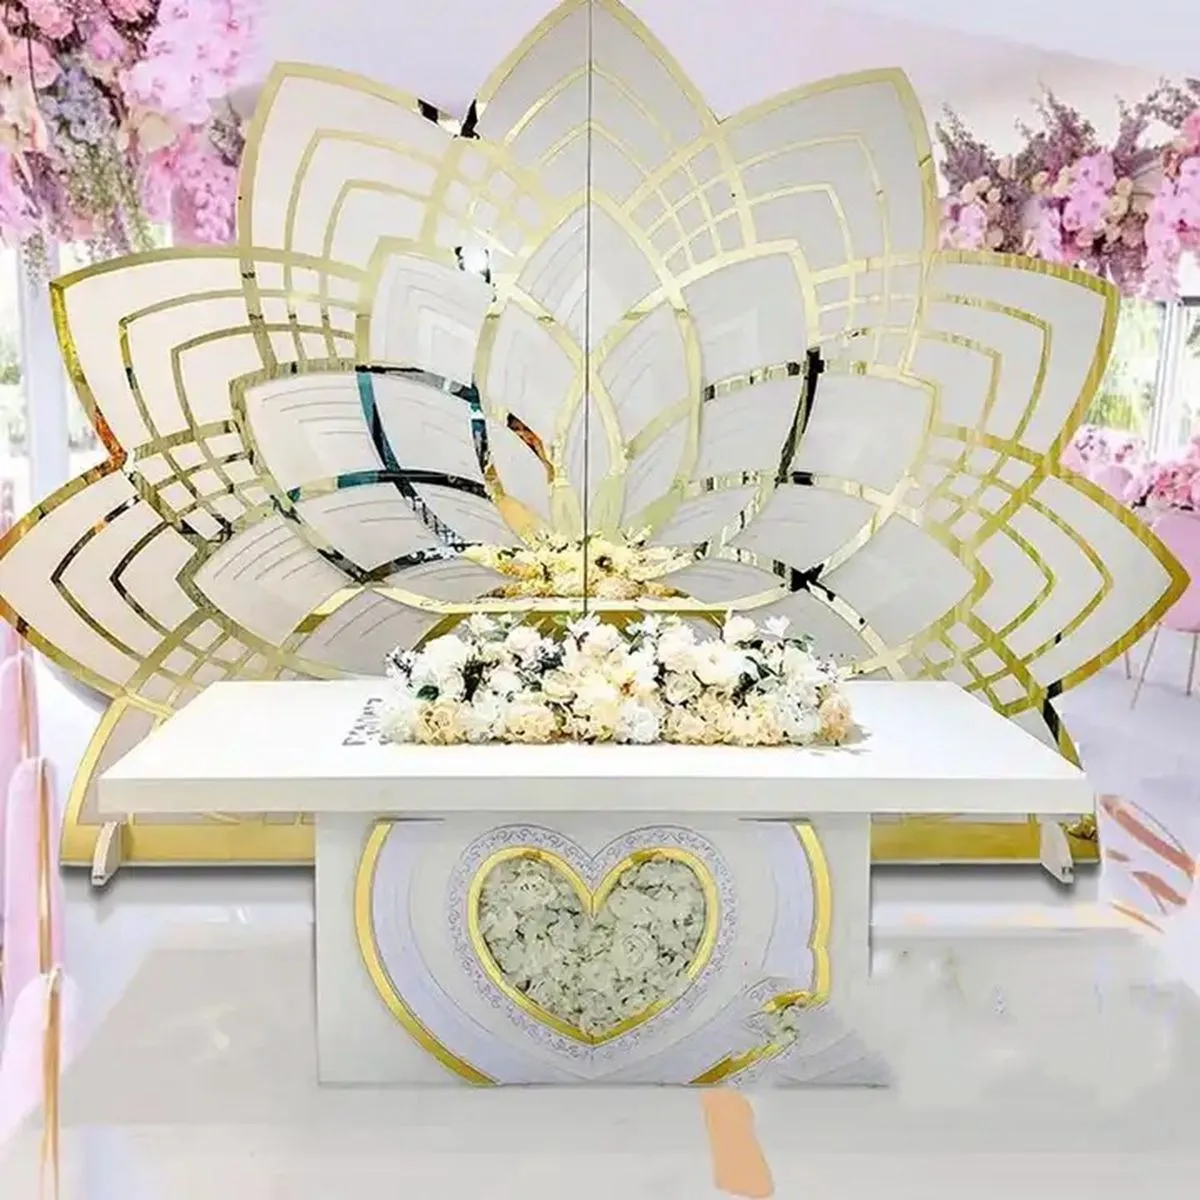 Luxury party pvc panels backdrops stand for wedding events stage decoration wedding props wedding stage layout dream flying wedding back